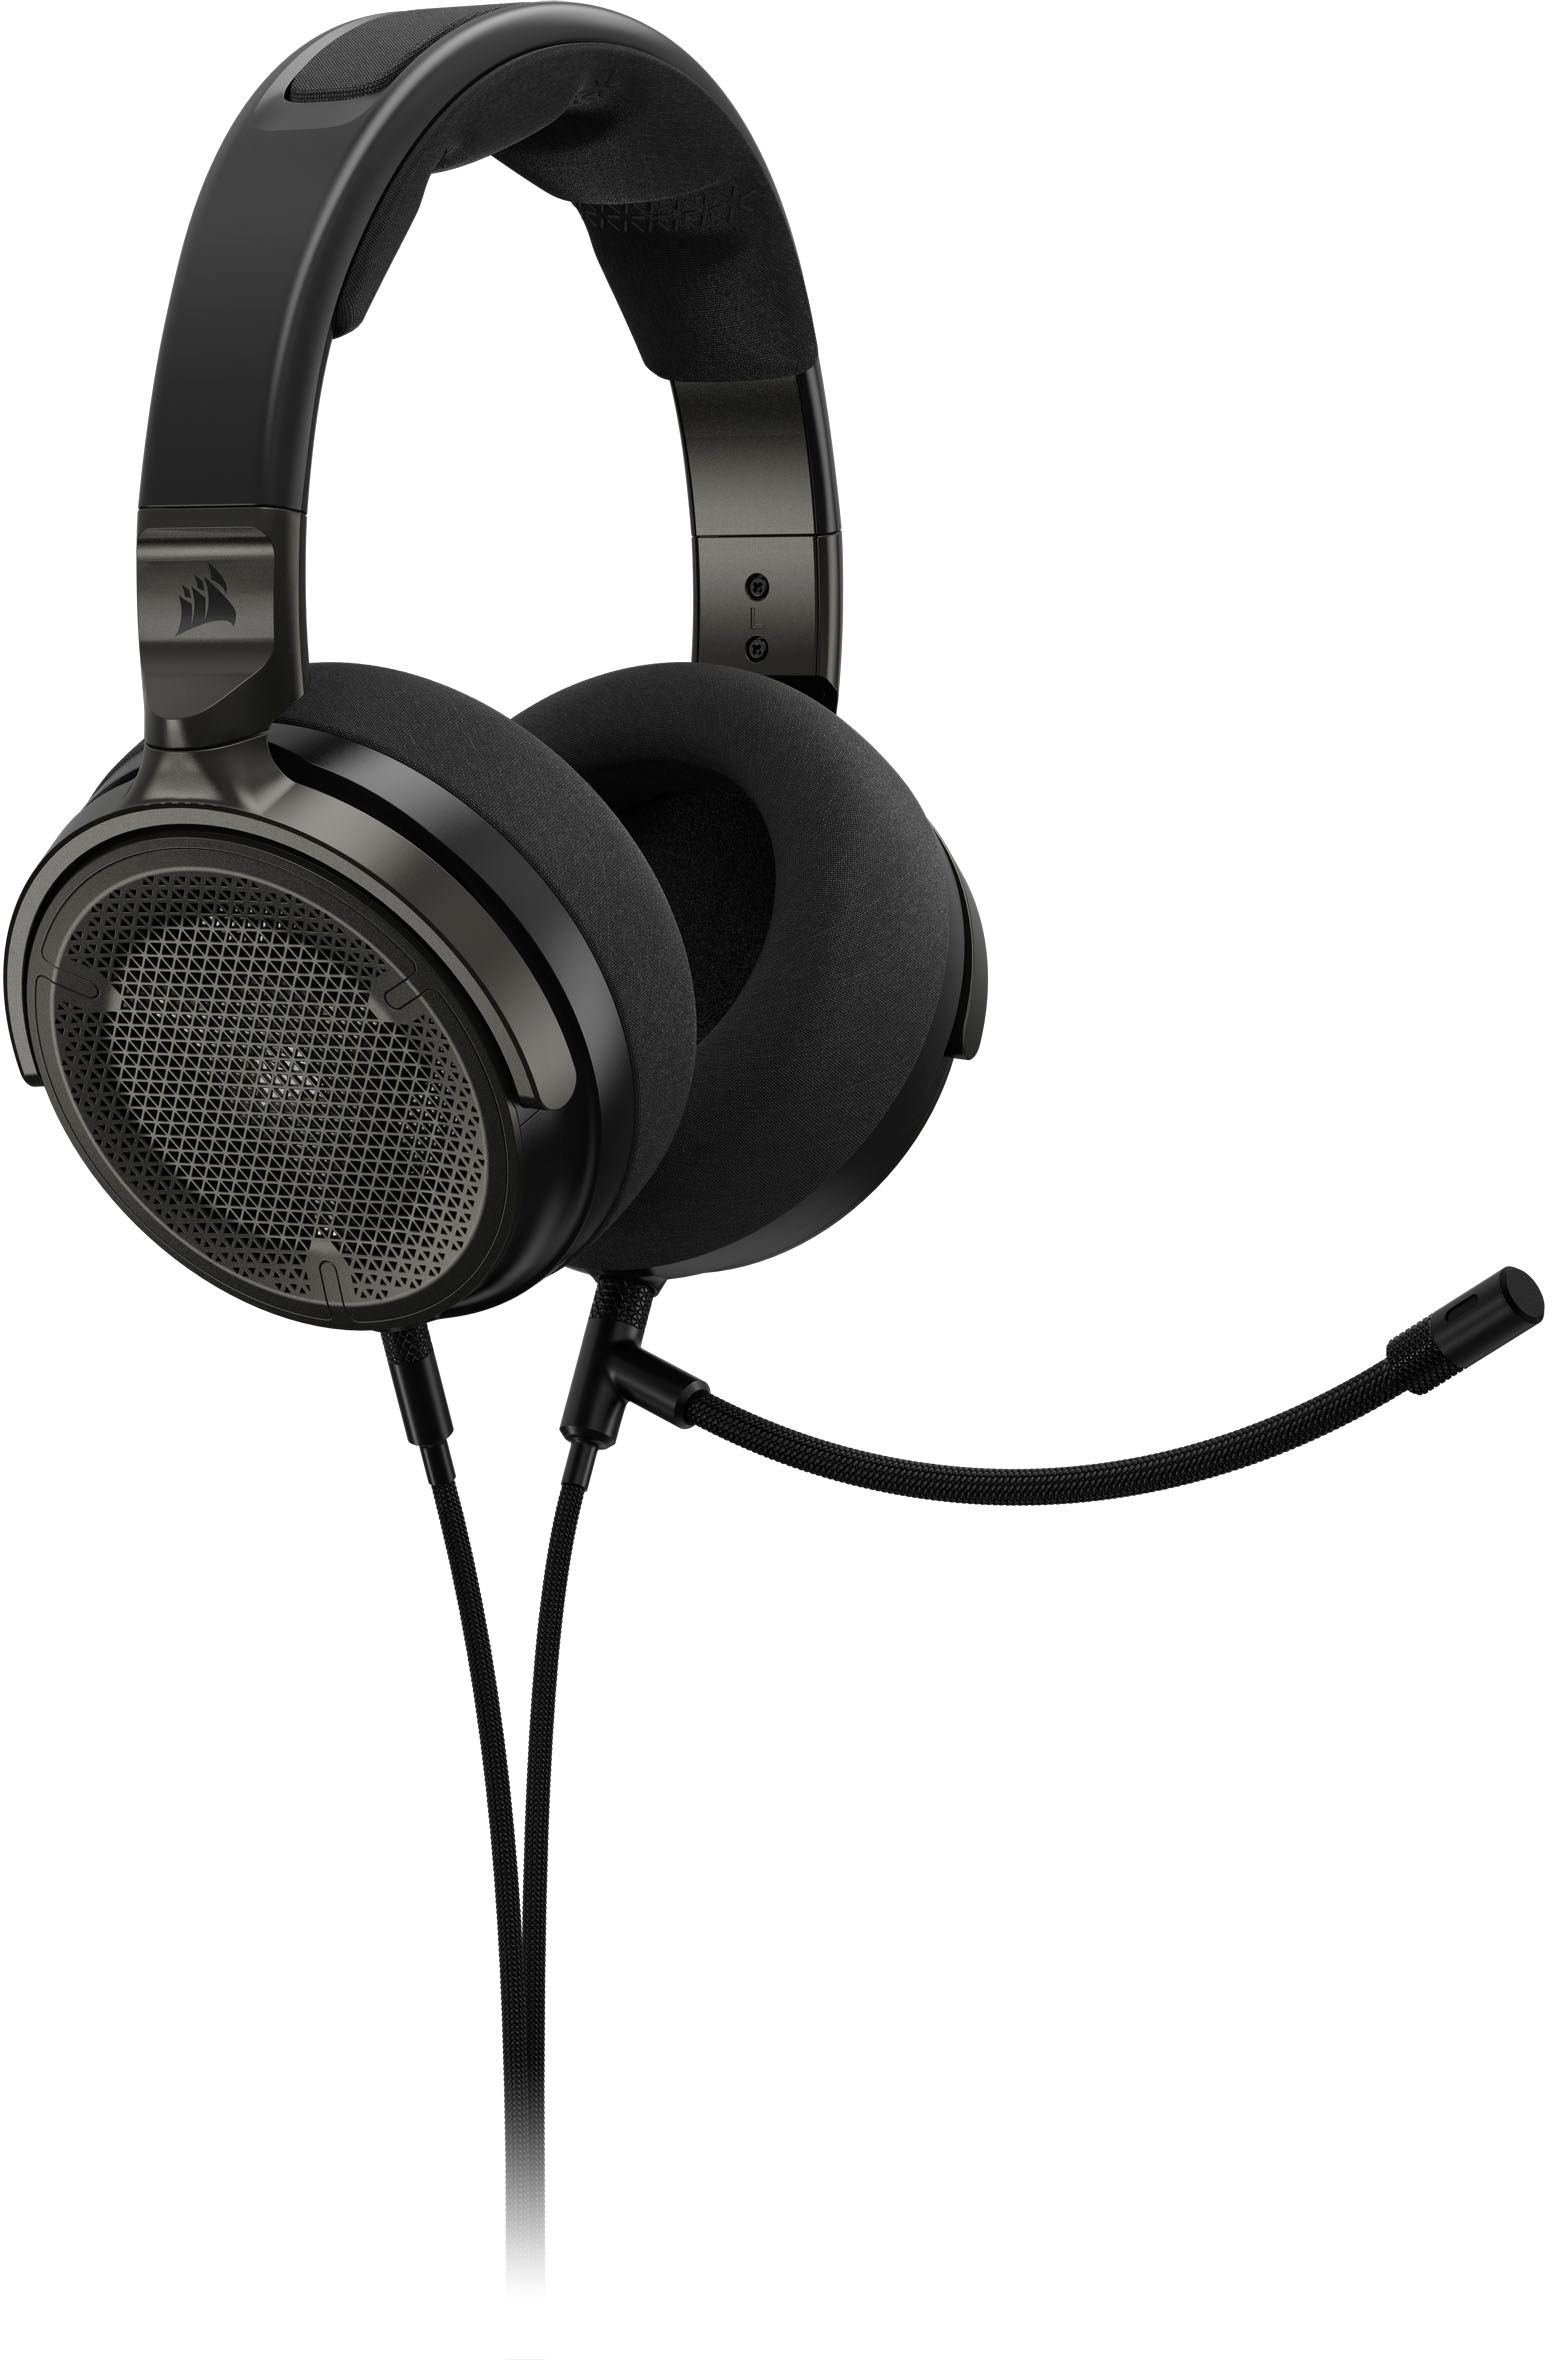 PRO Back Best VIRTUOSO Buy Streaming/Gaming - CORSAIR CA-9011370-NA Open Headset Carbon Wired